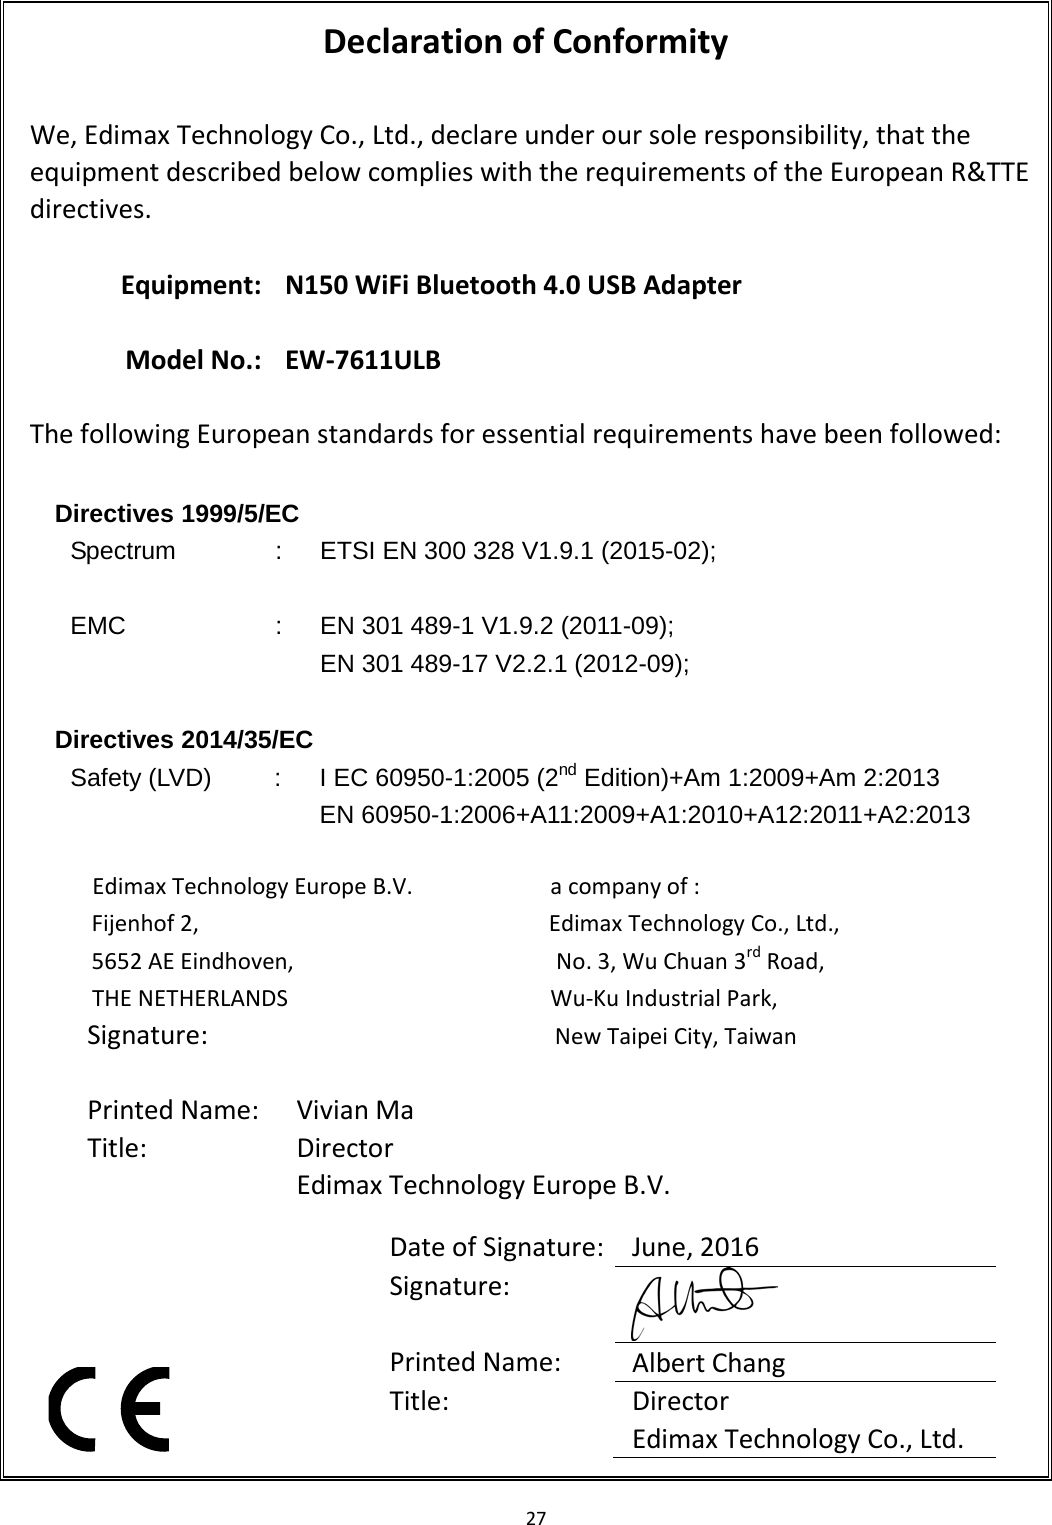 27   Declaration of Conformity  We, Edimax Technology Co., Ltd., declare under our sole responsibility, that the equipment described below complies with the requirements of the European R&amp;TTE directives.  Equipment: N150 WiFi Bluetooth 4.0 USB Adapter    Model No.: EW-7611ULB  The following European standards for essential requirements have been followed:  Directives 1999/5/EC Spectrum  :  ETSI EN 300 328 V1.9.1 (2015-02);  EMC  :  EN 301 489-1 V1.9.2 (2011-09); EN 301 489-17 V2.2.1 (2012-09);    Directives 2014/35/EC   Safety (LVD)  :  I EC 60950-1:2005 (2nd Edition)+Am 1:2009+Am 2:2013 EN 60950-1:2006+A11:2009+A1:2010+A12:2011+A2:2013  Edimax Technology Europe B.V.                      a company of : Fijenhof 2,                                       Edimax Technology Co., Ltd., 5652 AE Eindhoven,                     No. 3, Wu Chuan 3rd Road, THE NETHERLANDS                     Wu-Ku Industrial Park,                                               New Taipei City, Taiwan          Date of Signature: June, 2016 Signature:  Printed Name: Albert Chang Title: Director Edimax Technology Co., Ltd.  Signature:   Printed Name: Vivian Ma Title:  Director Edimax Technology Europe B.V.   